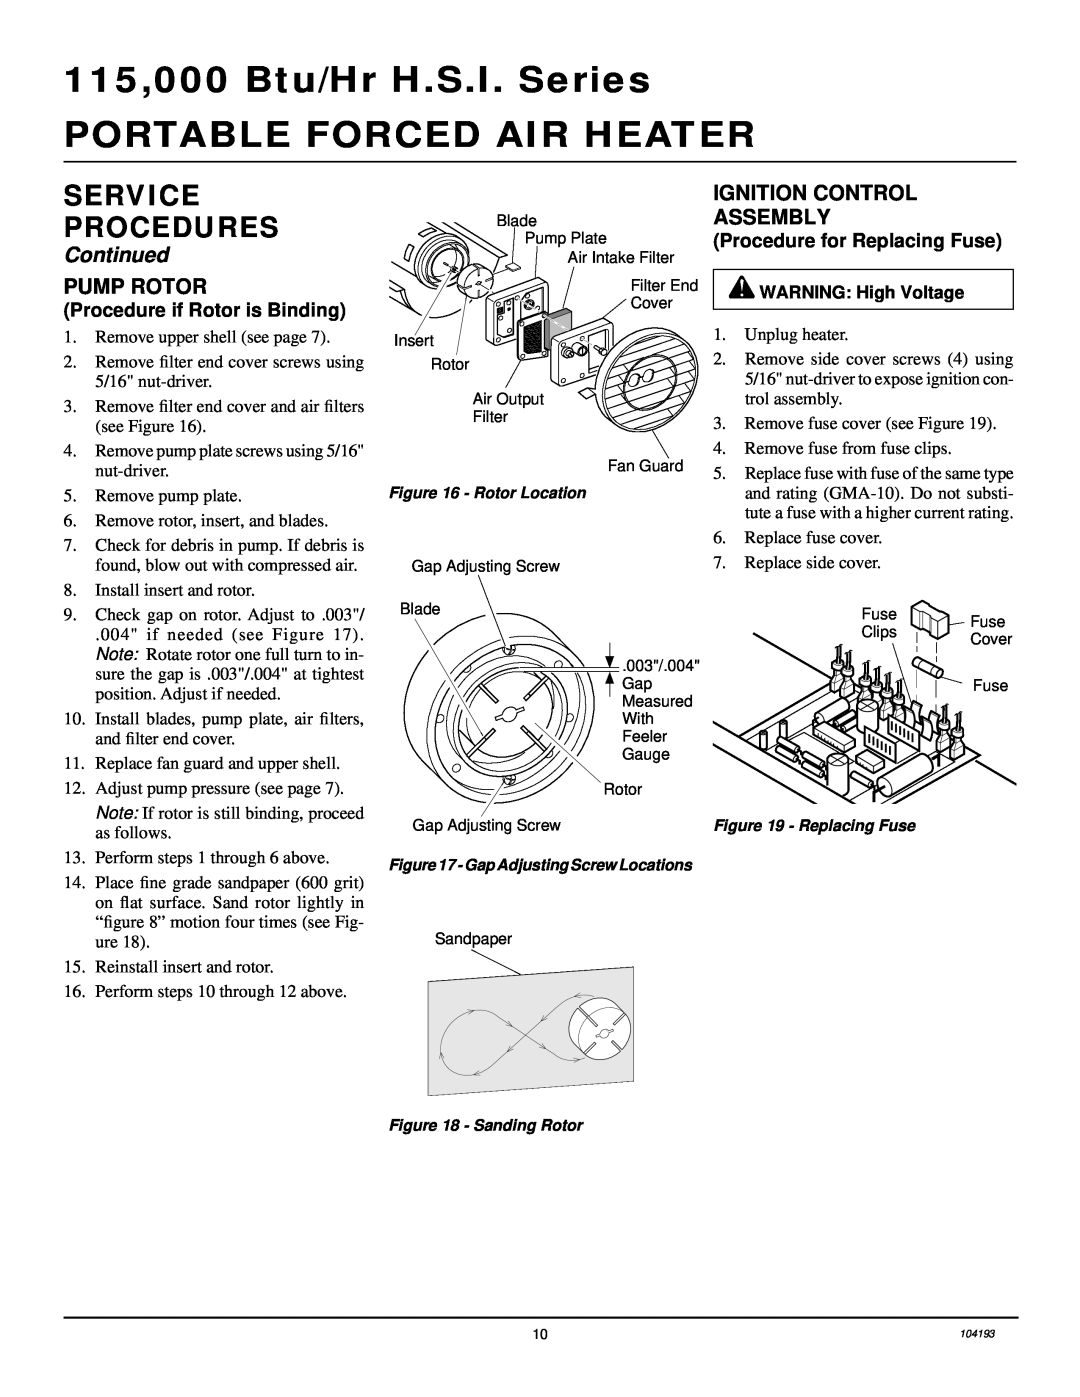 Desa R115T Pump Rotor, Ignition Control Assembly, Procedure if Rotor is Binding, Procedure for Replacing Fuse, Continued 